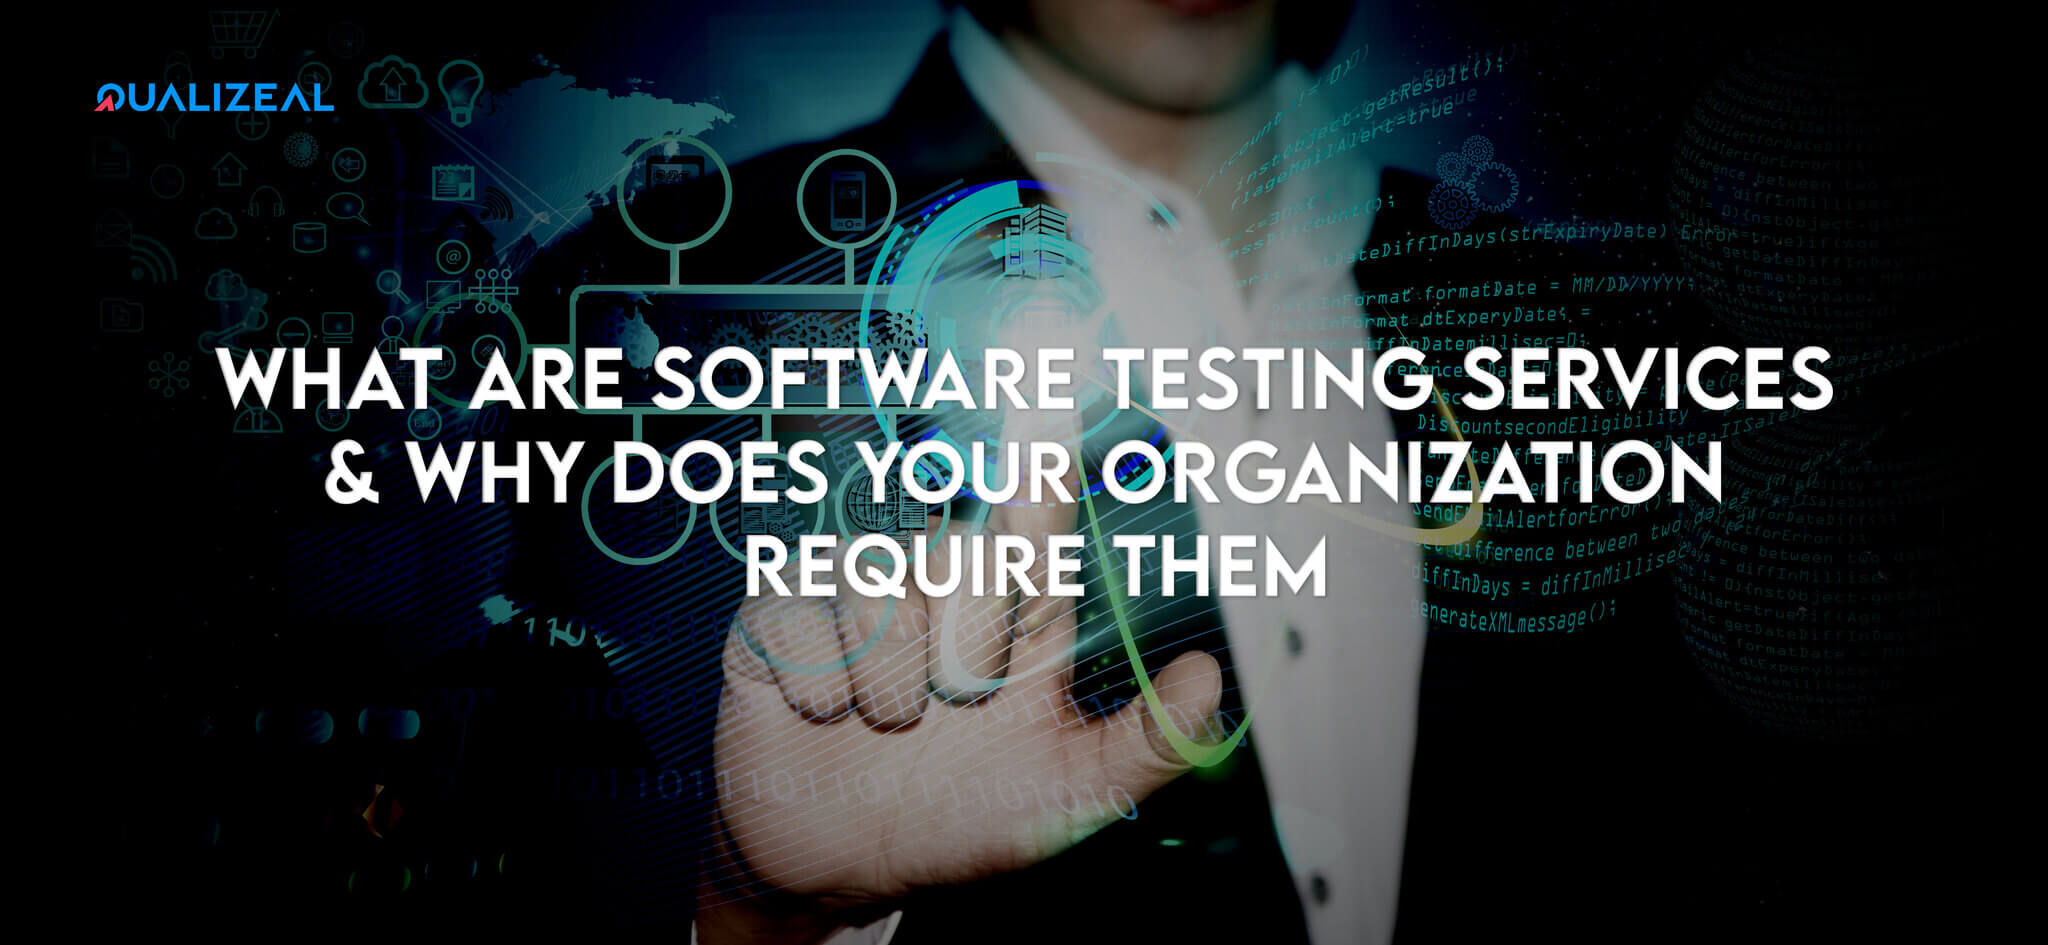 What Are Software Testing Services & Why Does Your Organization Require Them